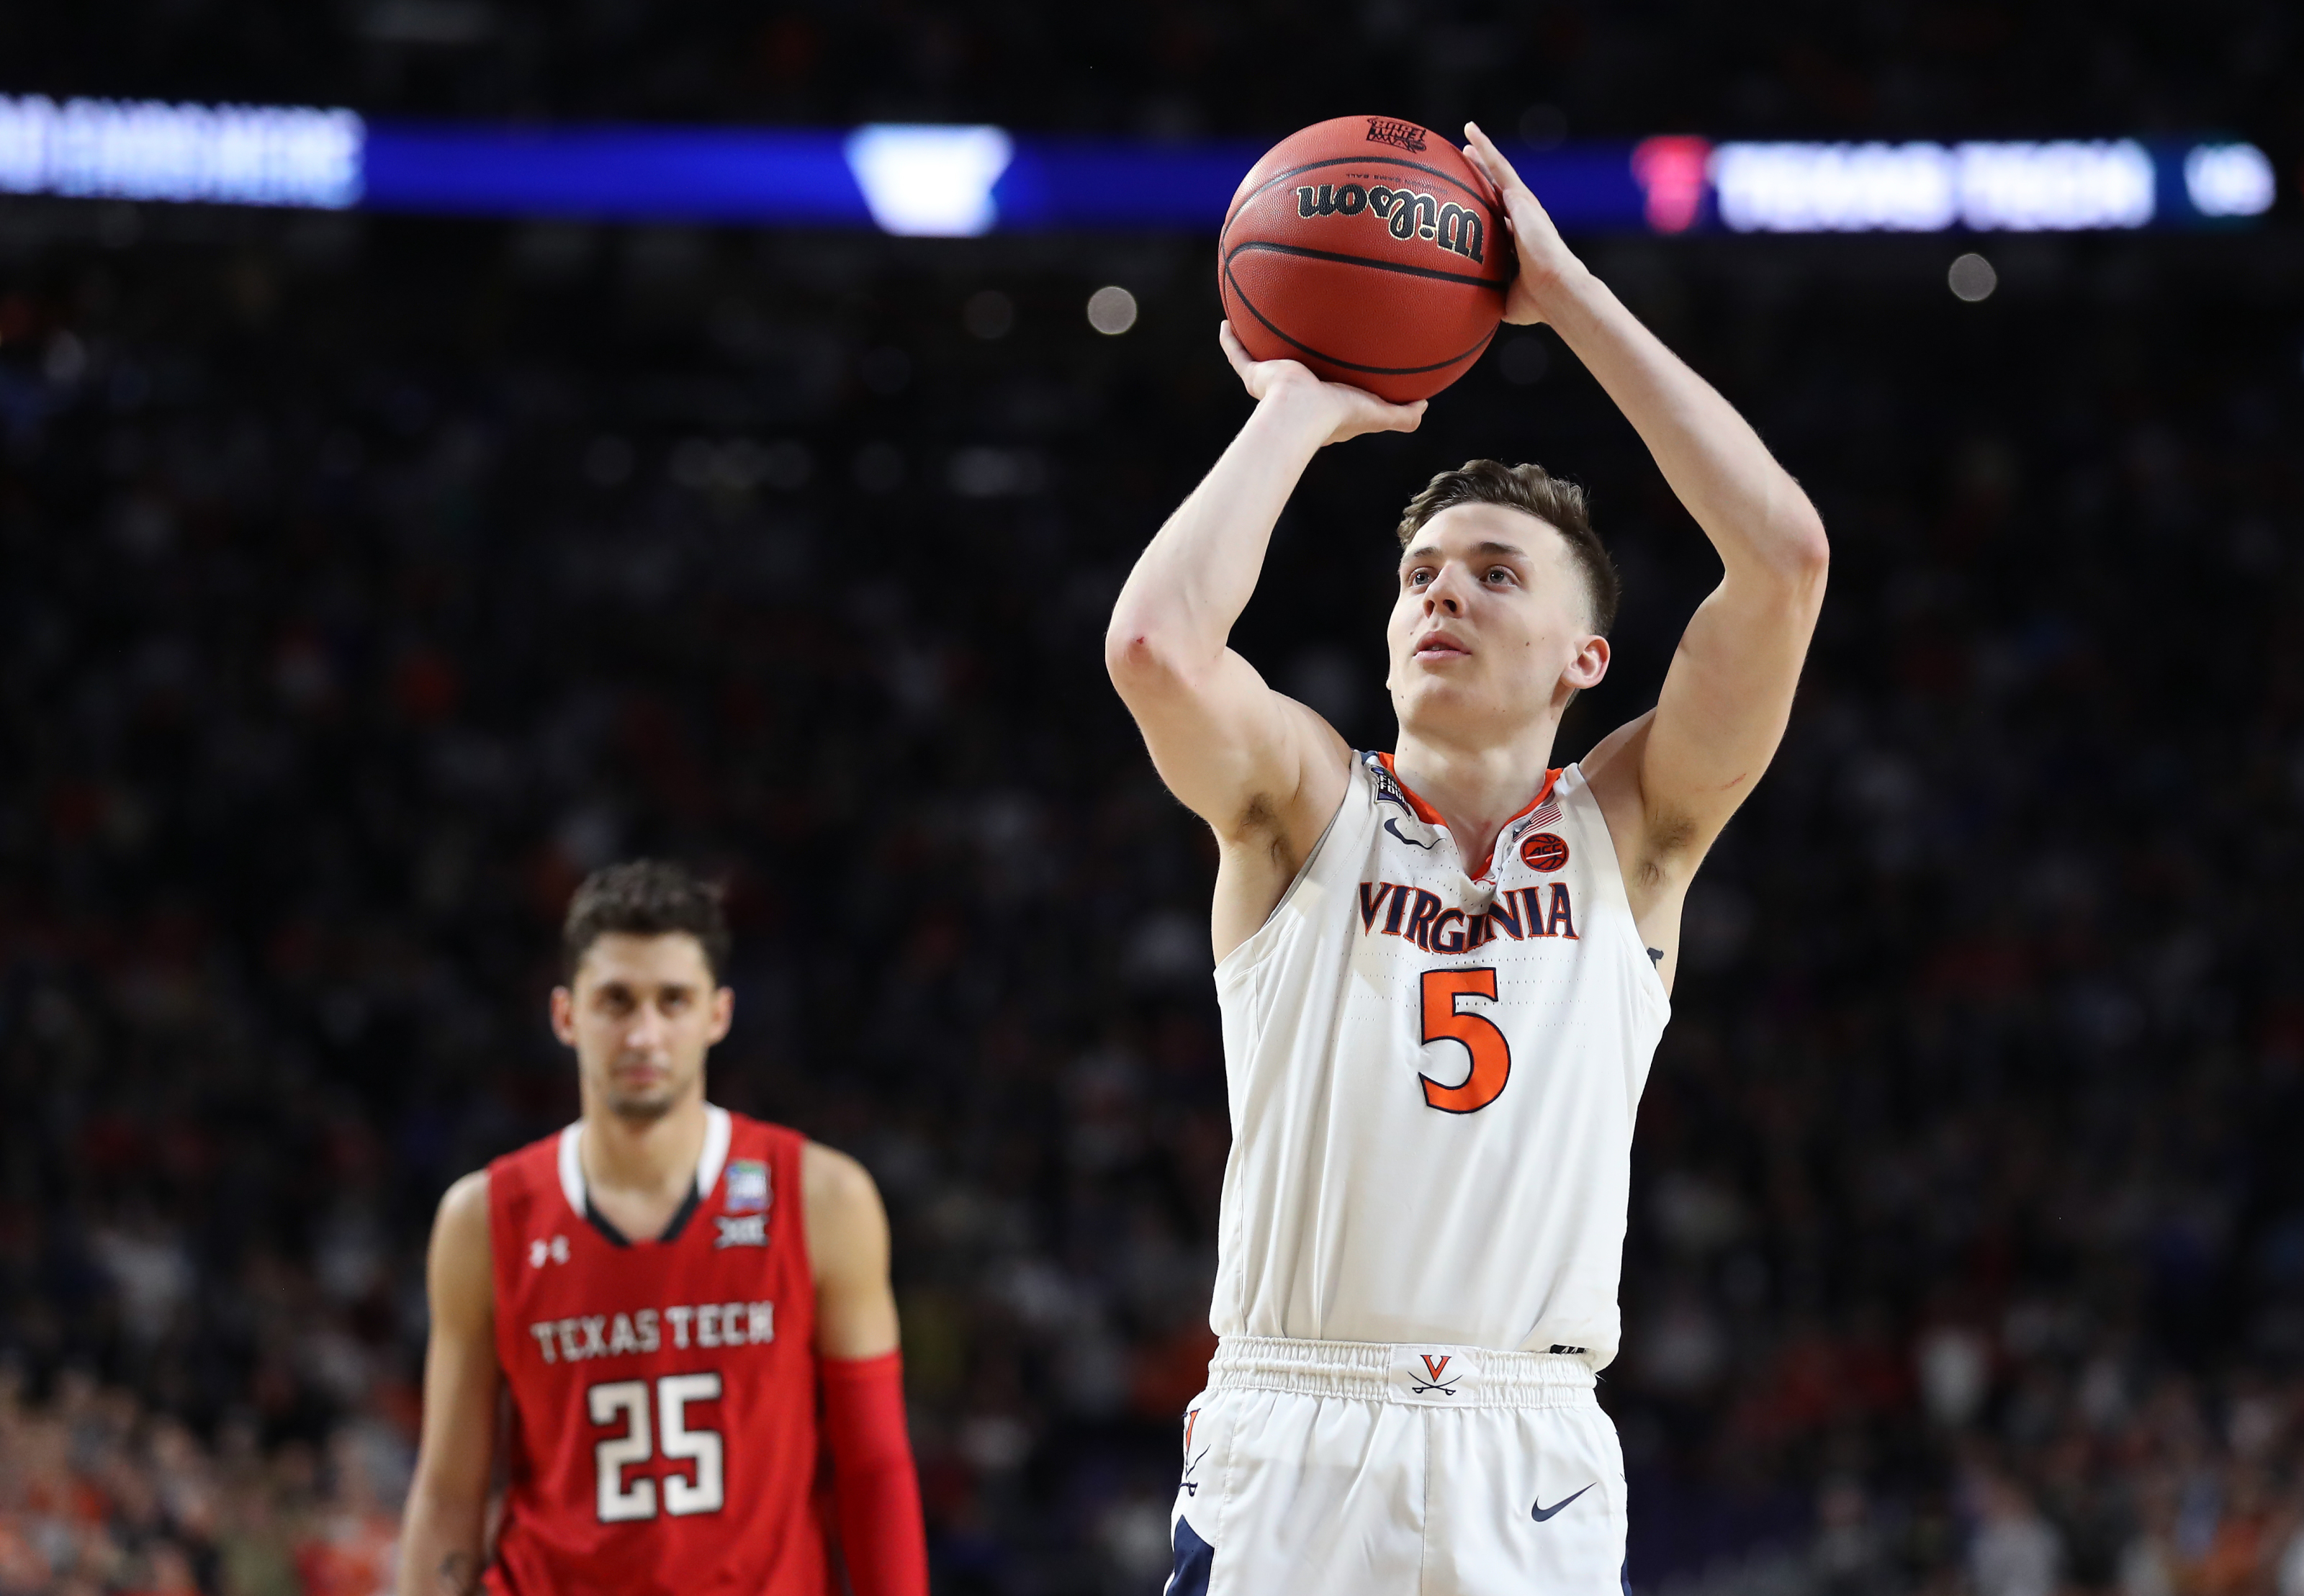 NCAA championship: Virginia guard Kyle Guy makes best kind of history